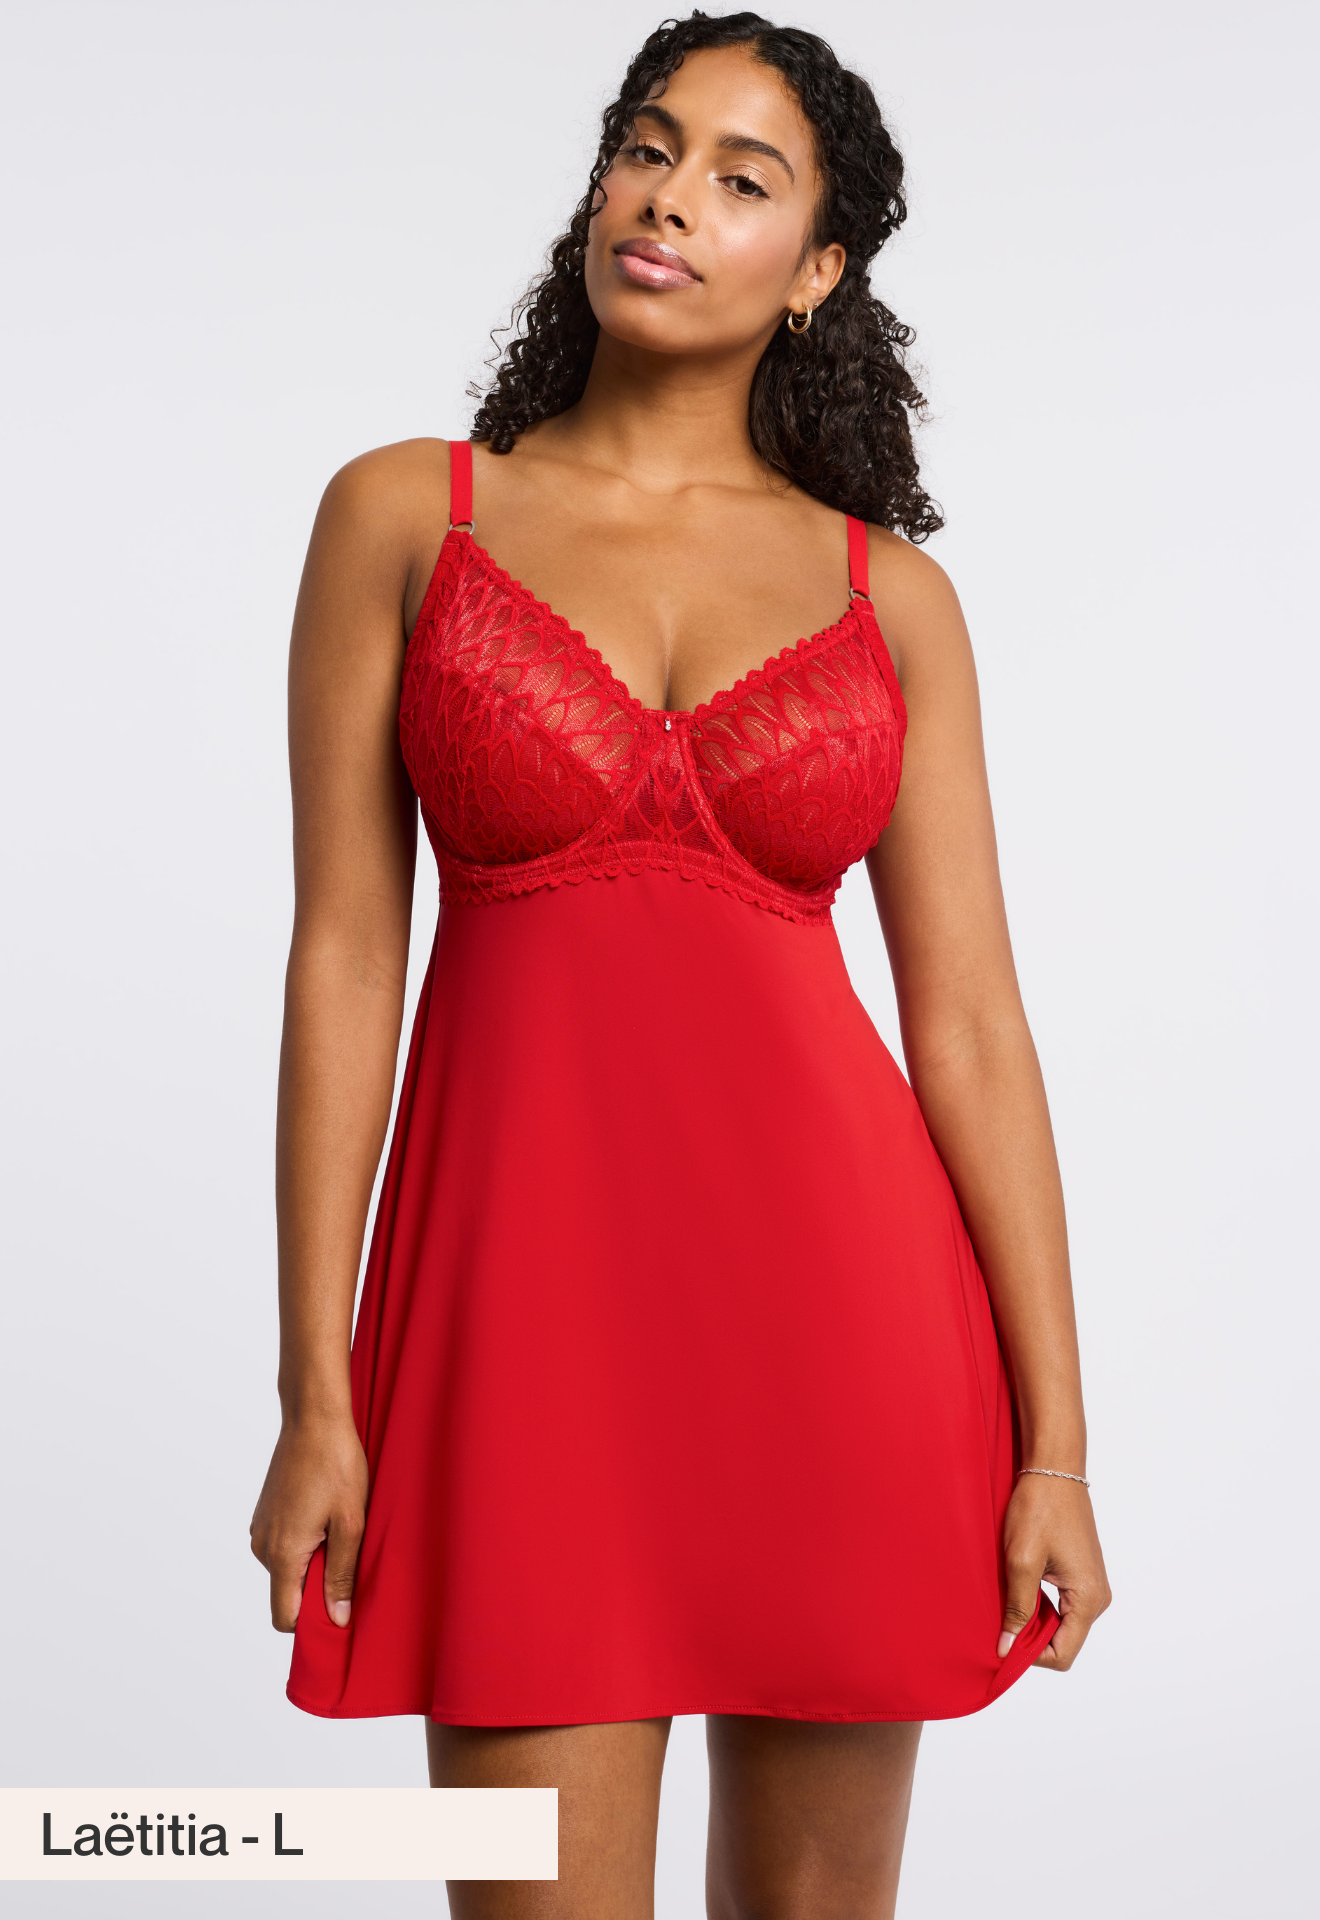 Lacy Muse Babydoll Set - Sweet Red worn by model front view